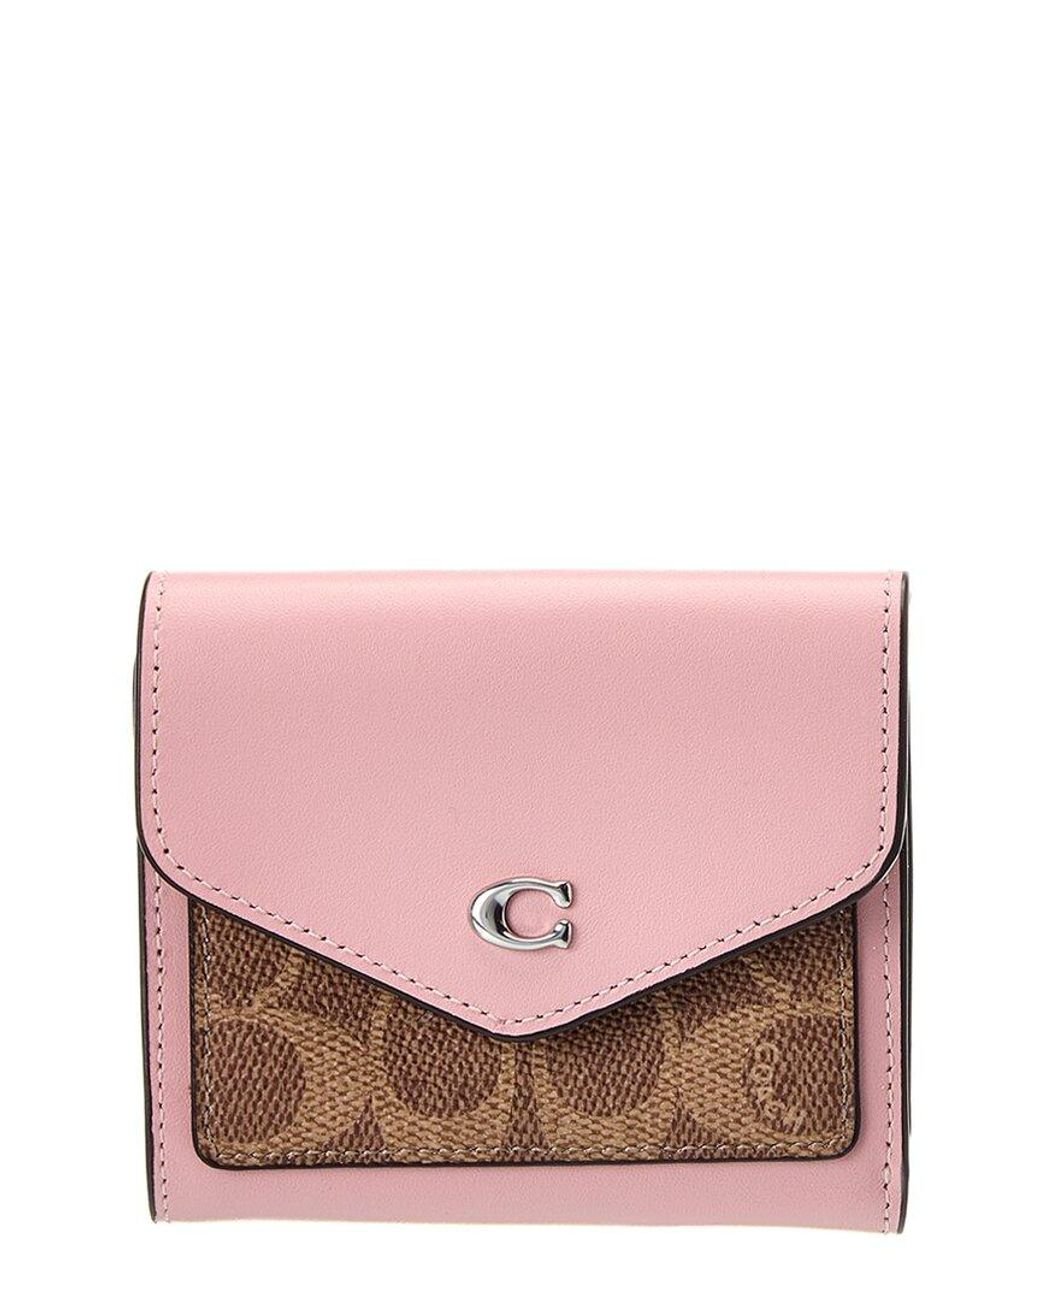 COACH Wyn Colorblocked Signature Coated Canvas & Leather Wallet in Pink ...